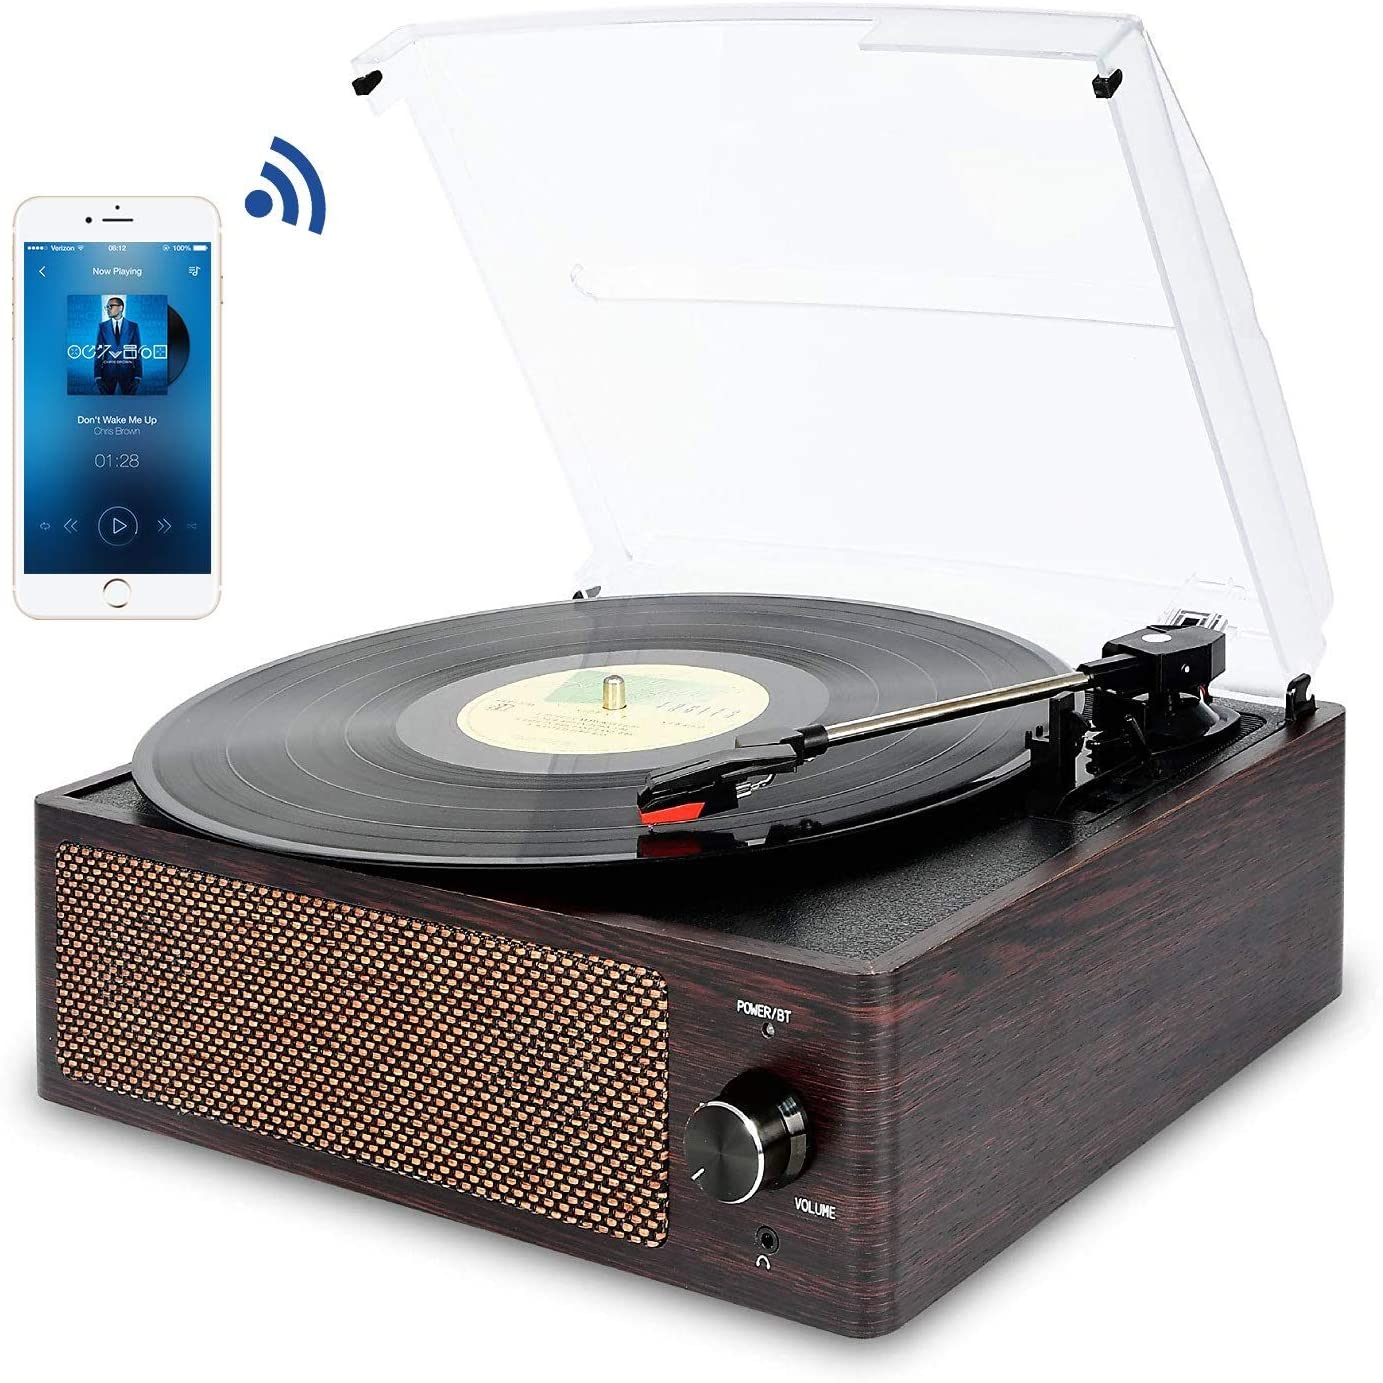 Vinyl Record Player Turntable with Built-in Stereo Speakers, Vintage  3-Speed Turntable for Vinyl Records USB SD Recording with Bluetooth Music  Playbac